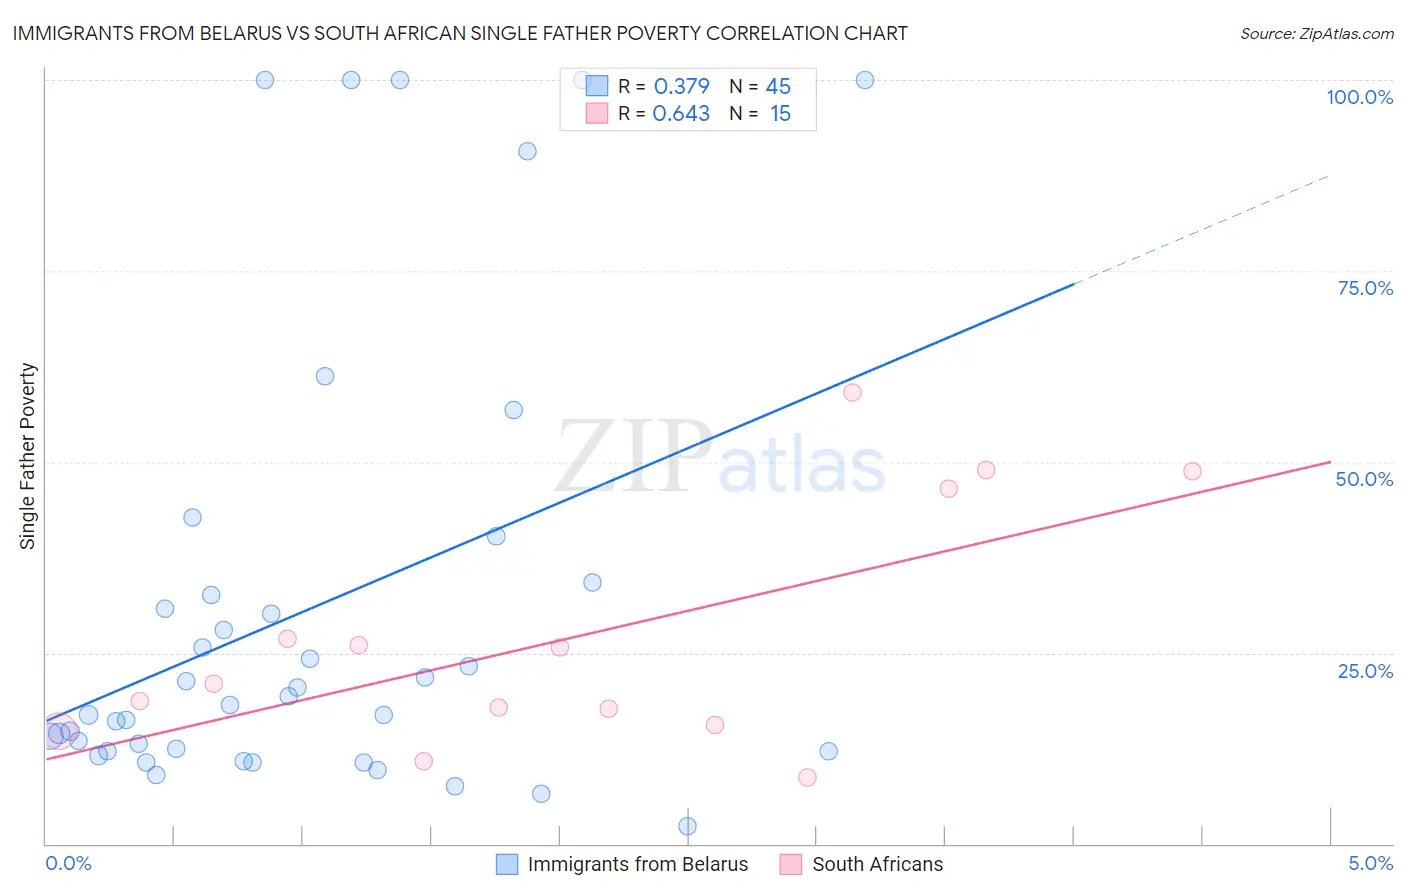 Immigrants from Belarus vs South African Single Father Poverty